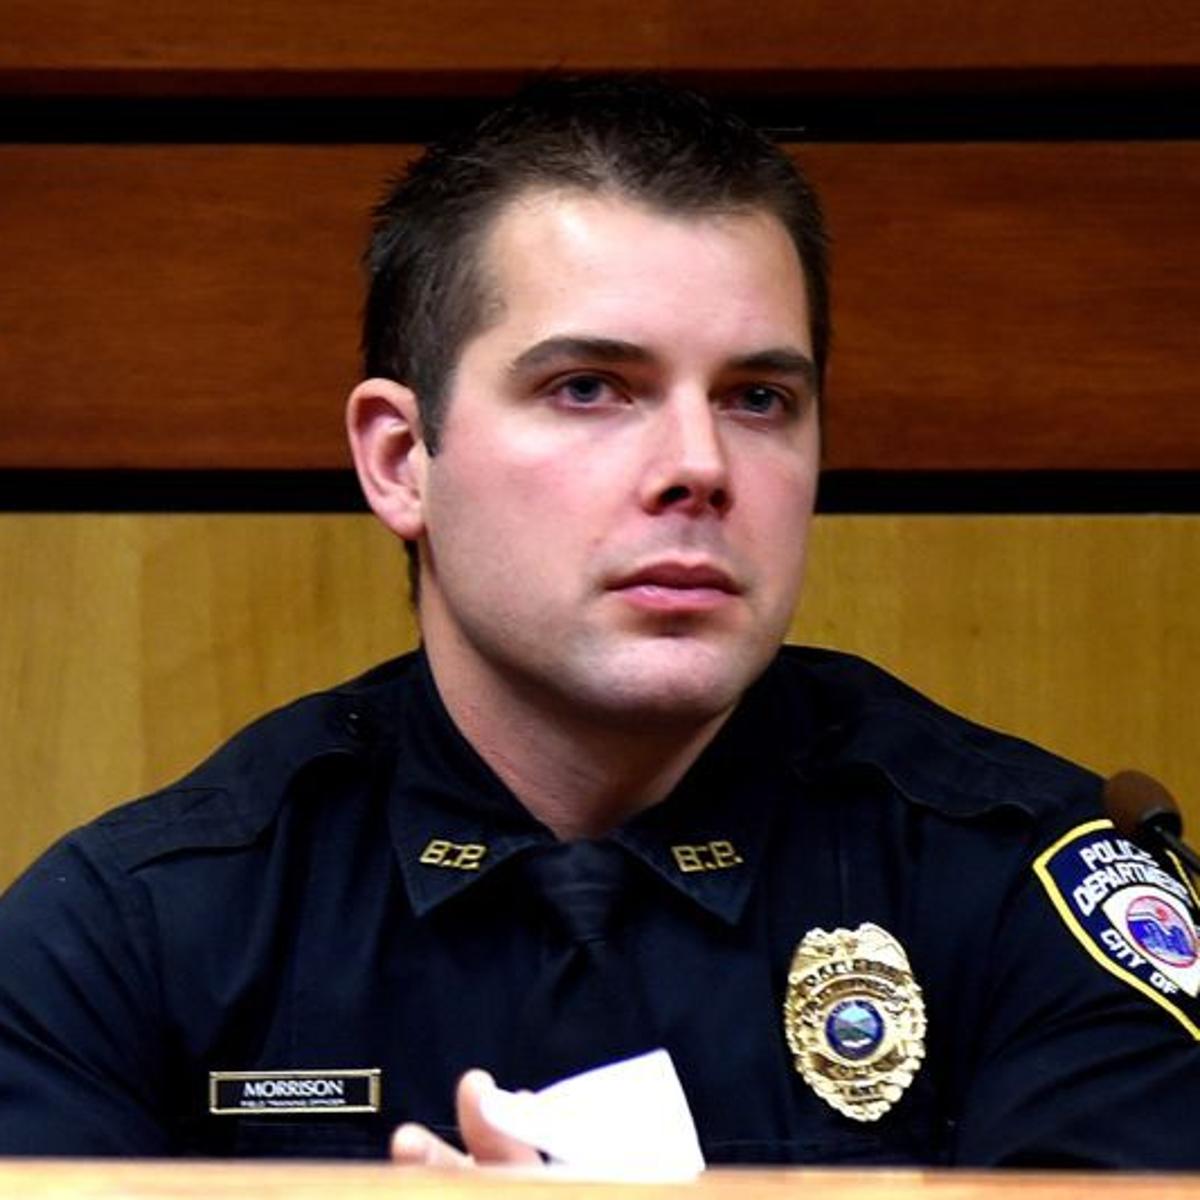 Montana Officer Reprimanded For Unauthorized Use Of Information